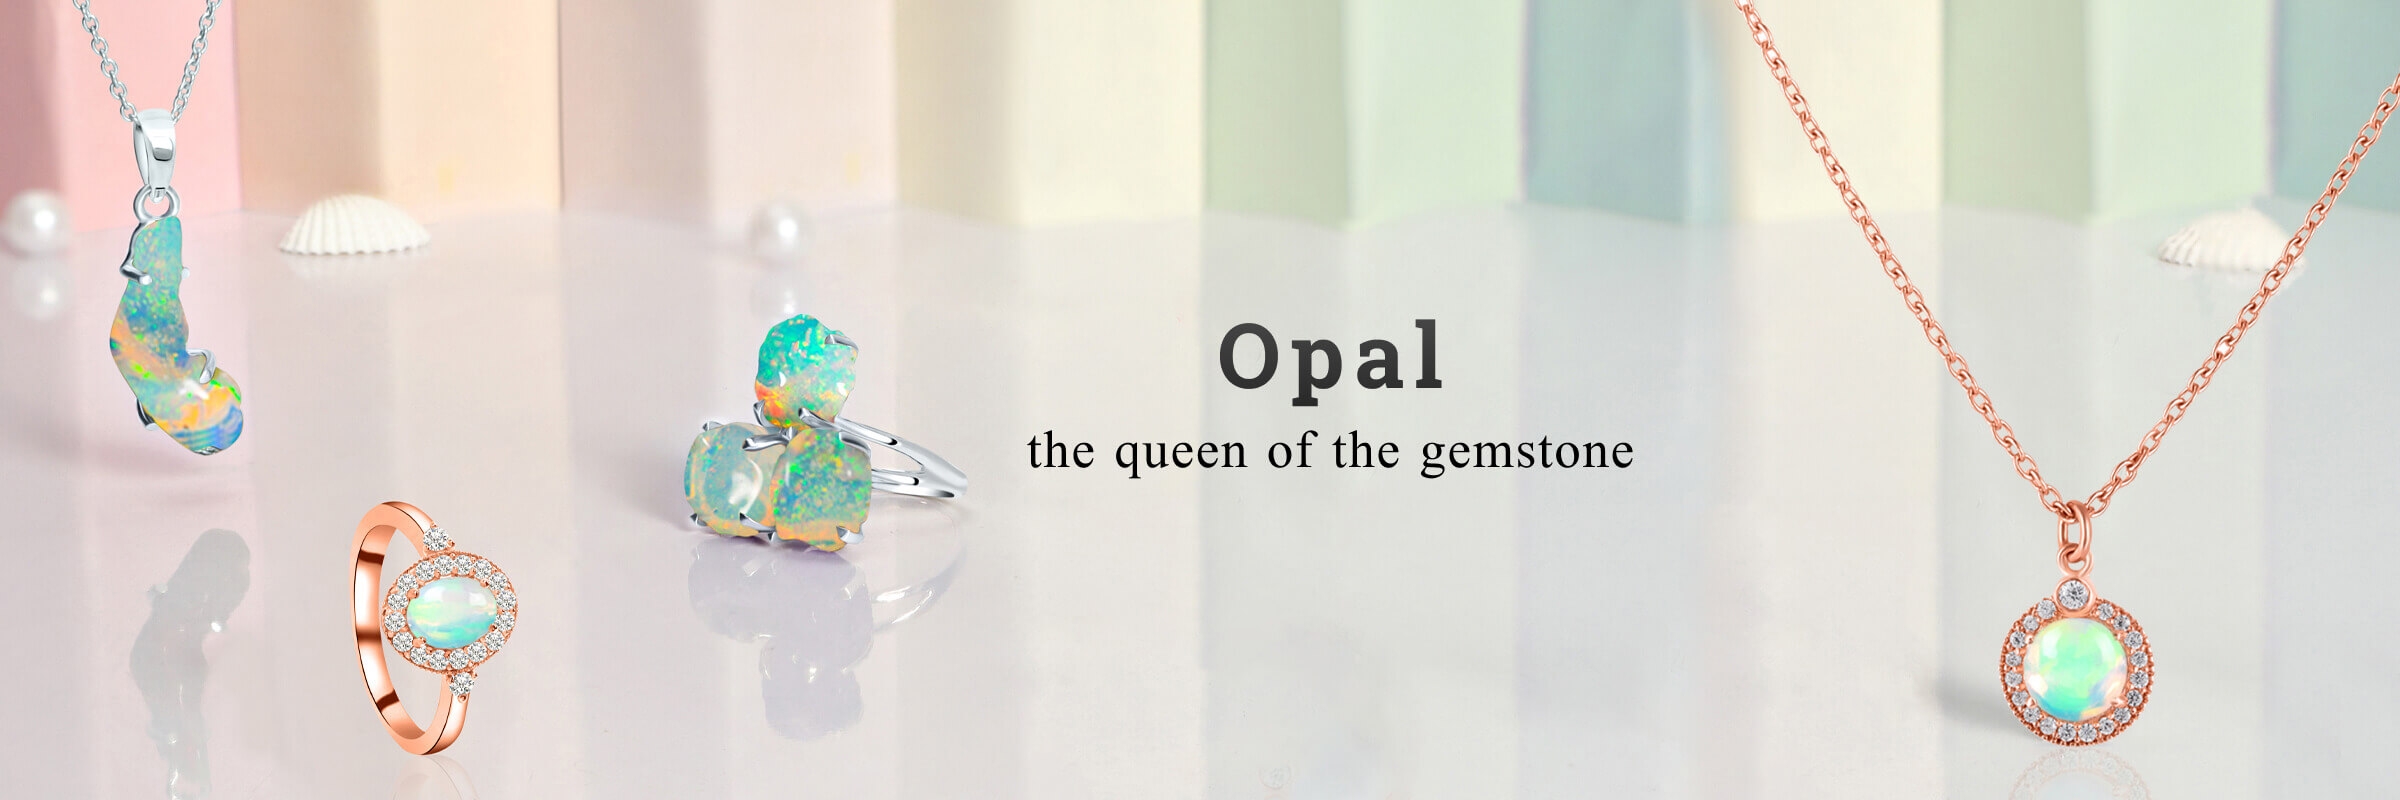 Opal - 'the queen of the gemstone